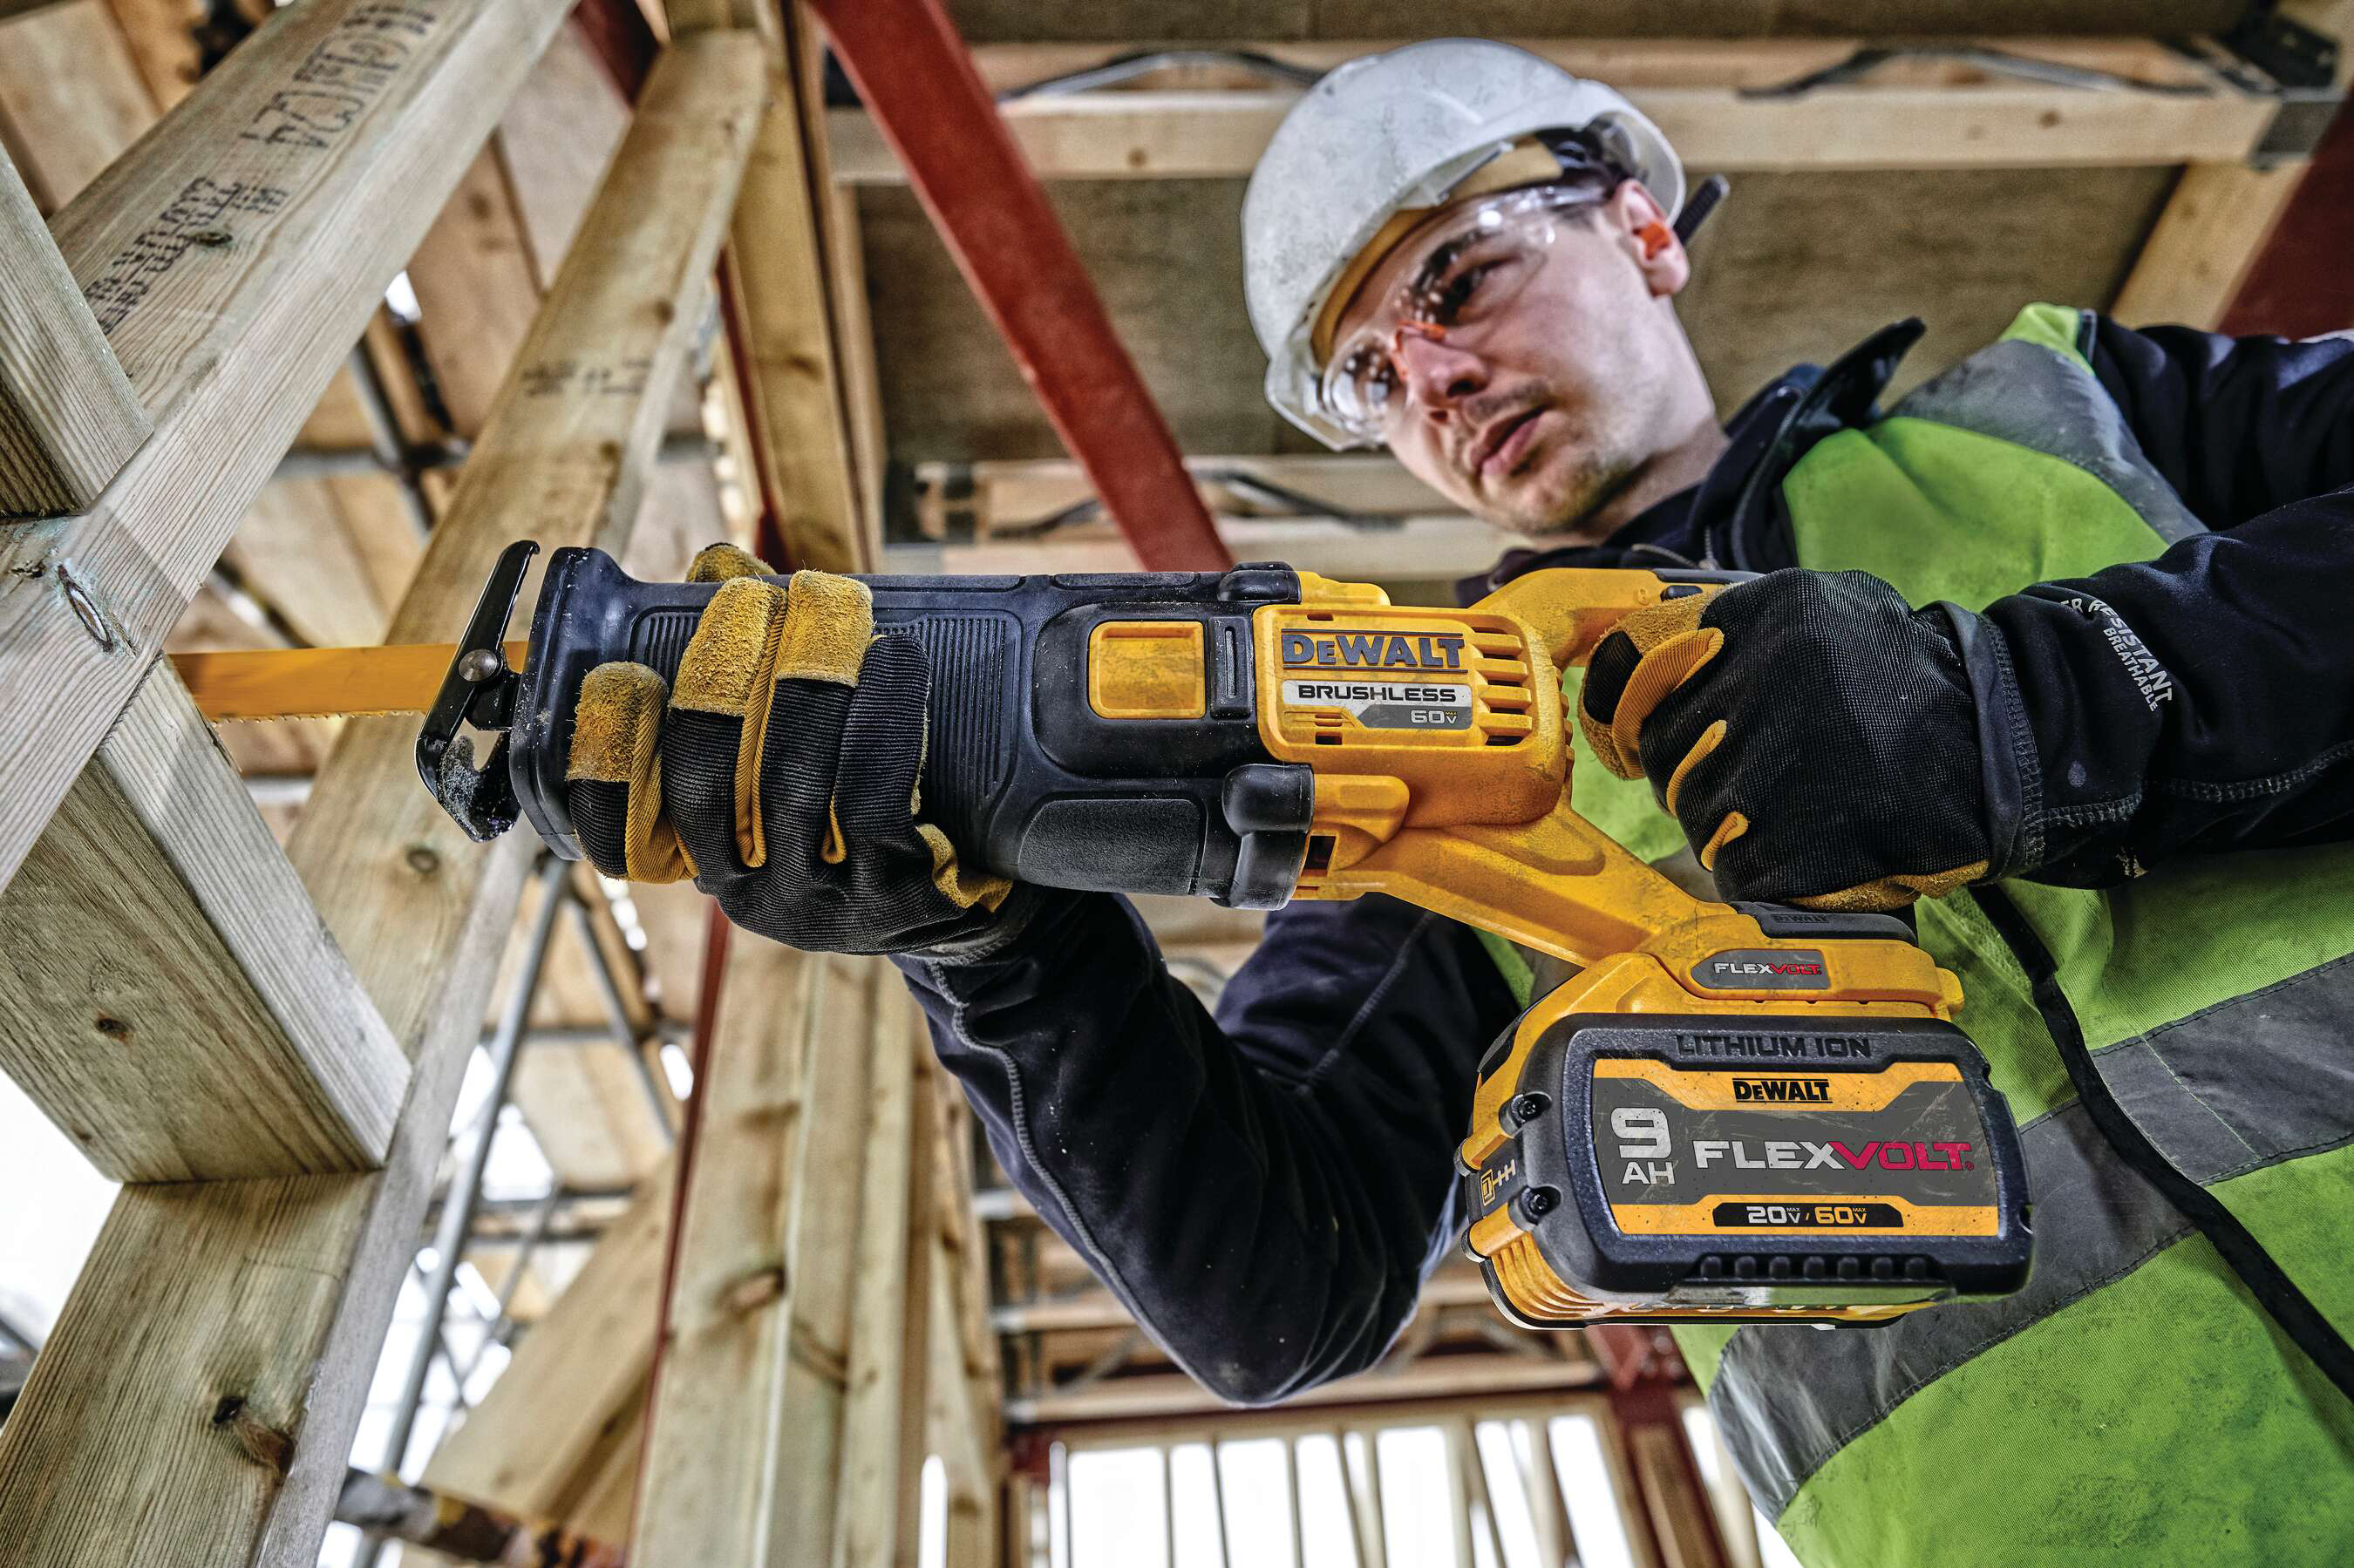 In 2016, DEWALT introduced FLEXVOLT™, which was the world’s ﬁrst battery that automatically changes voltage when the user changes tools.